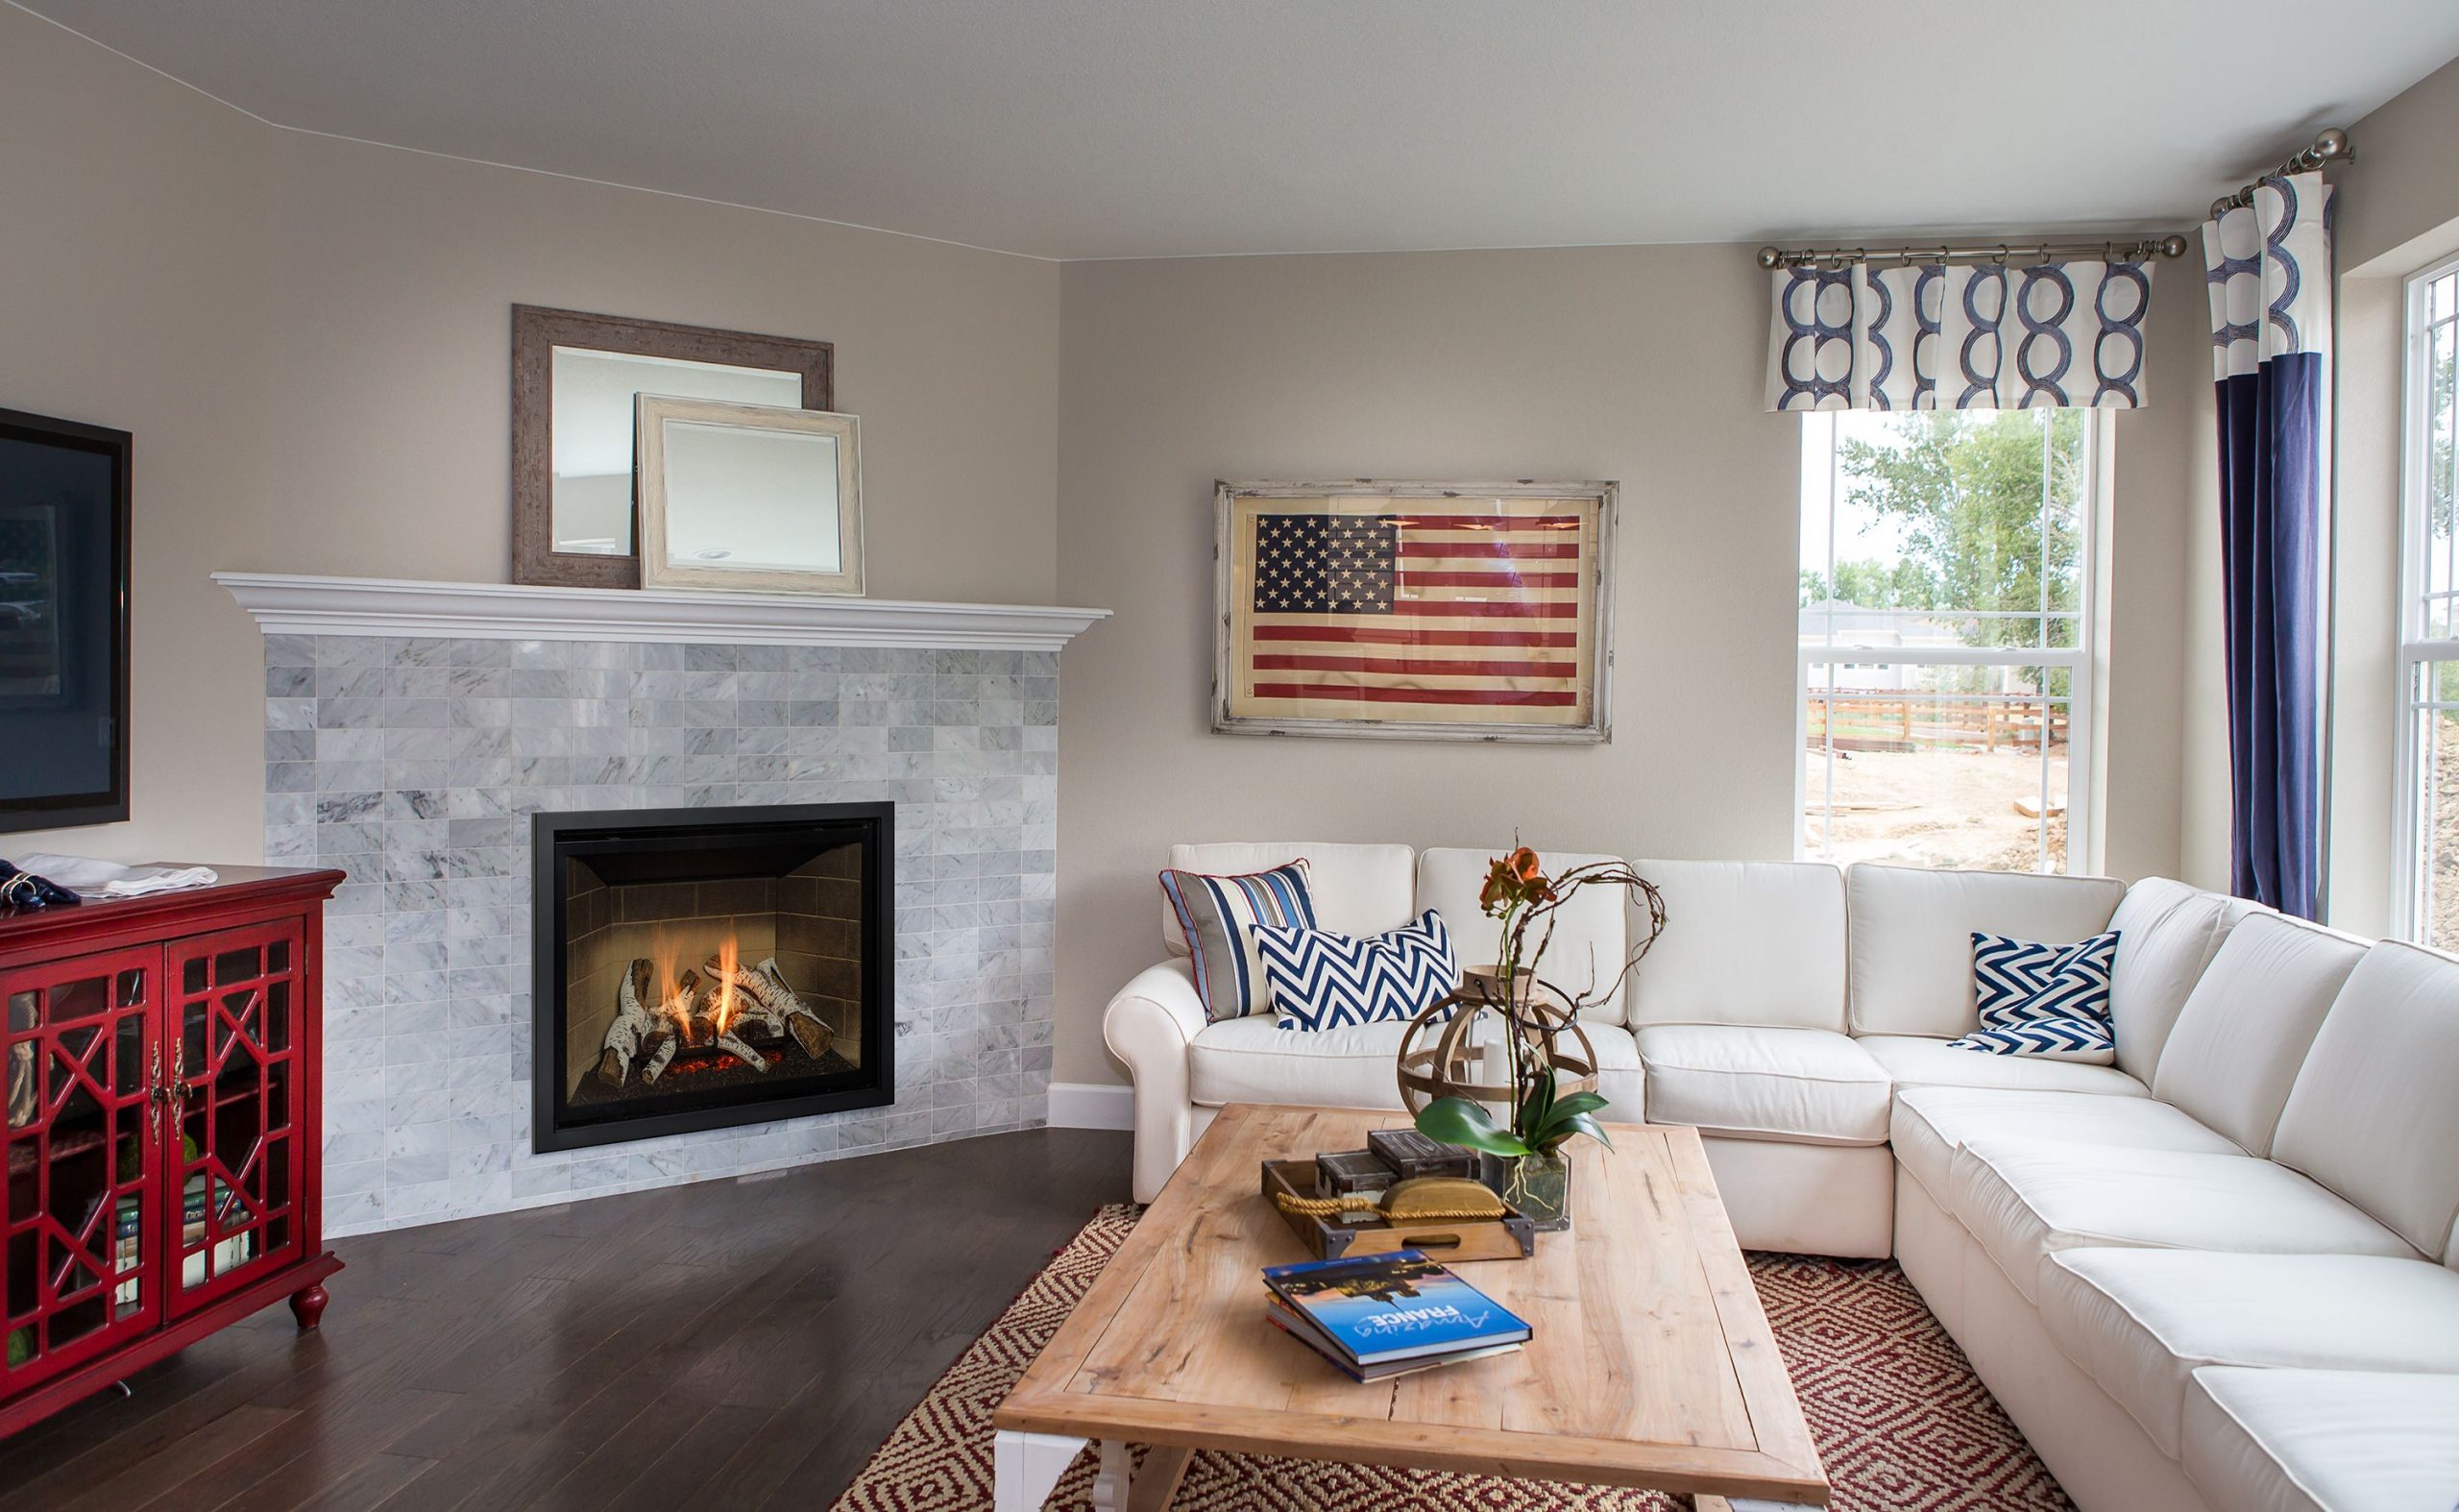 How Much Does it Cost to Install a Gas Fireplace?